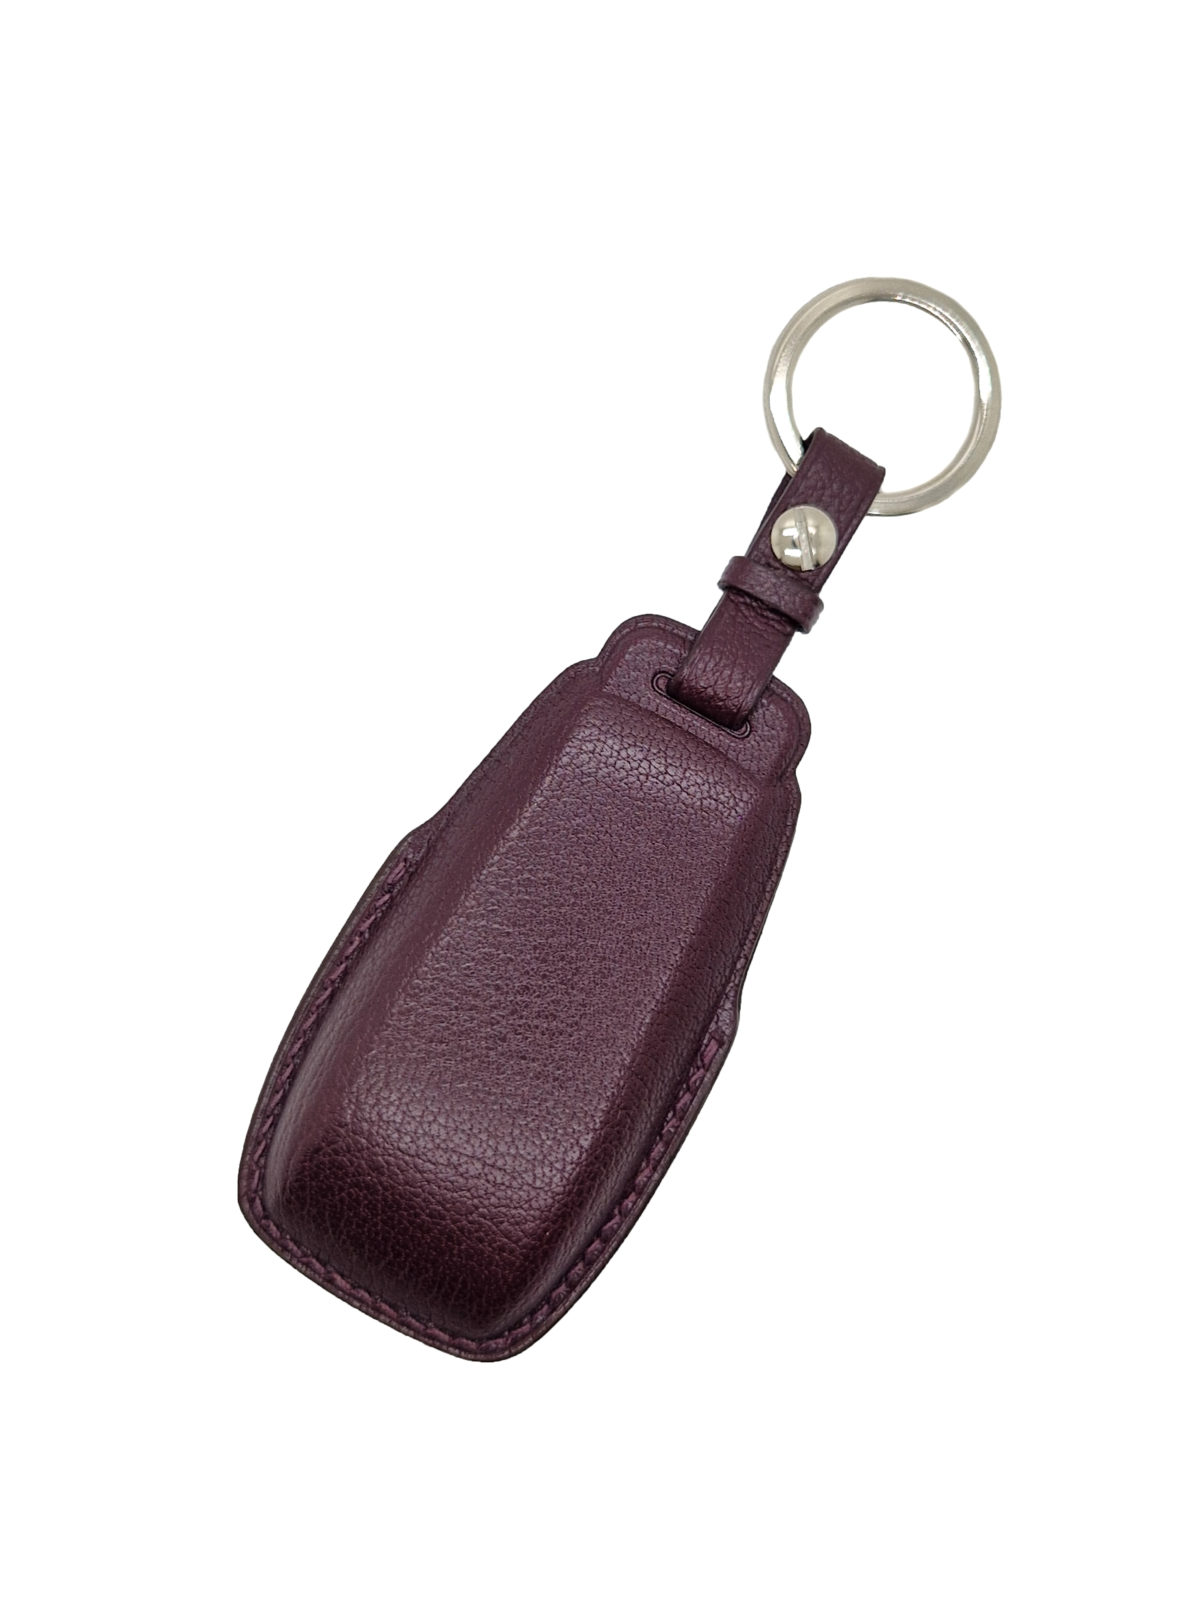 Mercedes-Benz leather key pouch